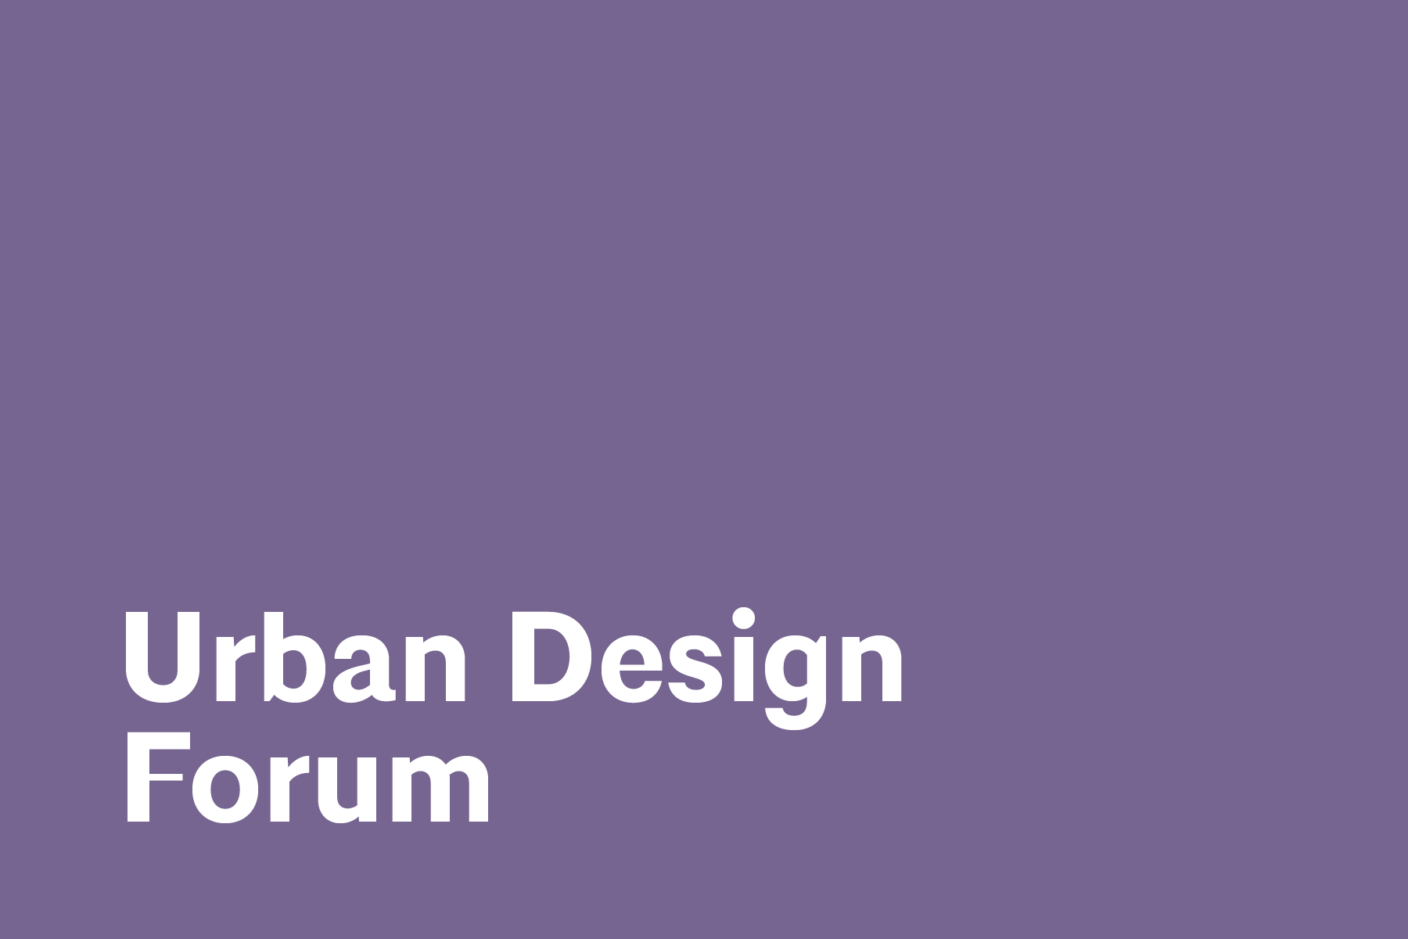 The Urban Design Forum serves members and the community by bringing forward critical issues facing Puget Sound neighborhoods and cities, in order to inform, engage, and support advocacy by AIA Seattle members and others who share a concern for the quality of the built environment.